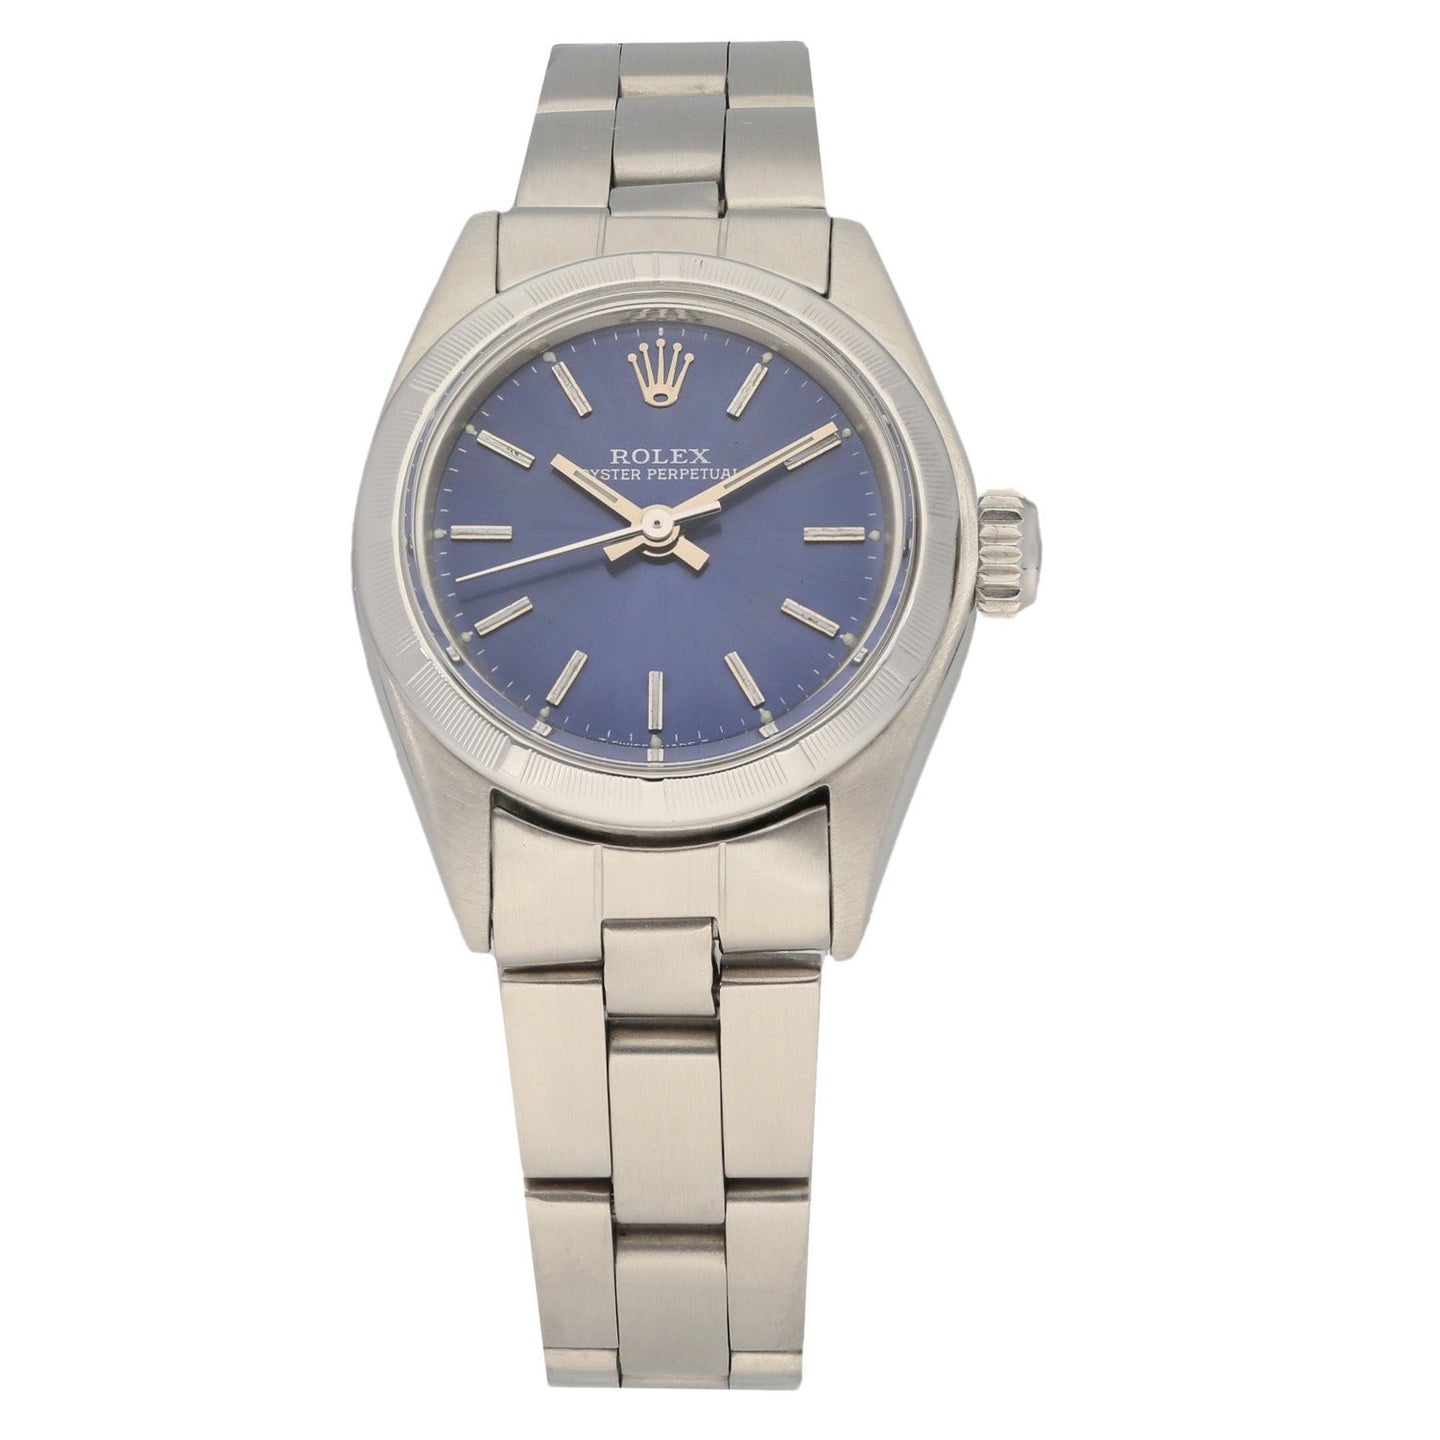 Rolex Oyster Perpetual 6723 24mm Stainless Steel Ladies Watch